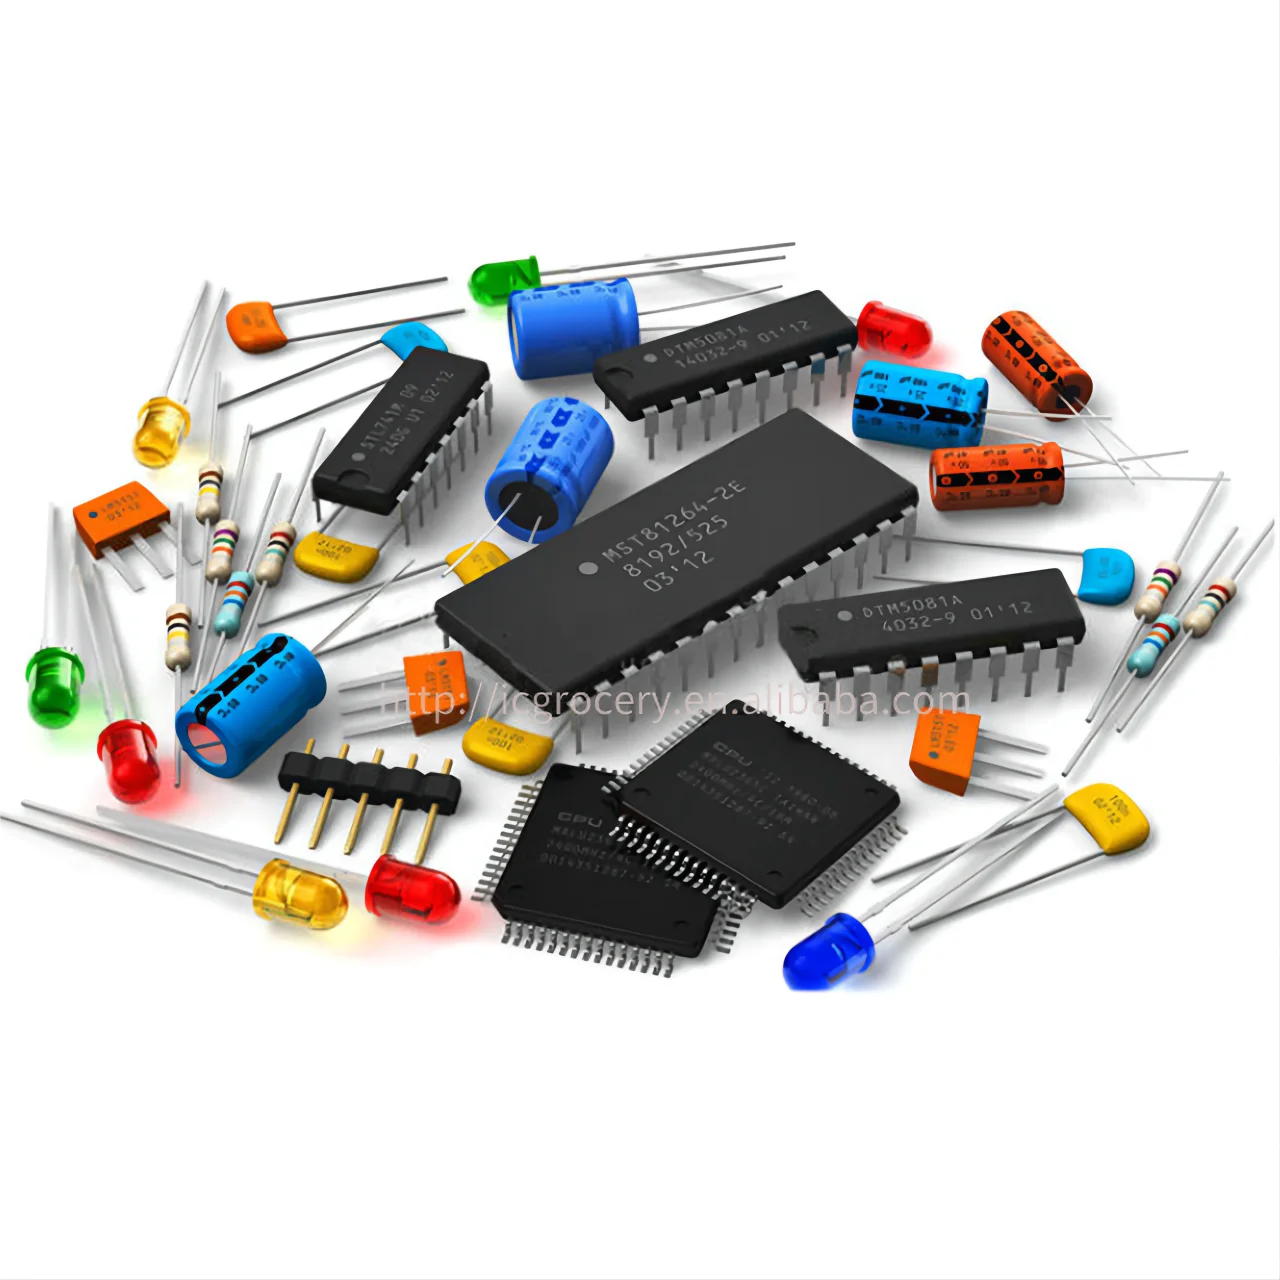 New Original In Stock One Stop Electronic Components Bom List ...